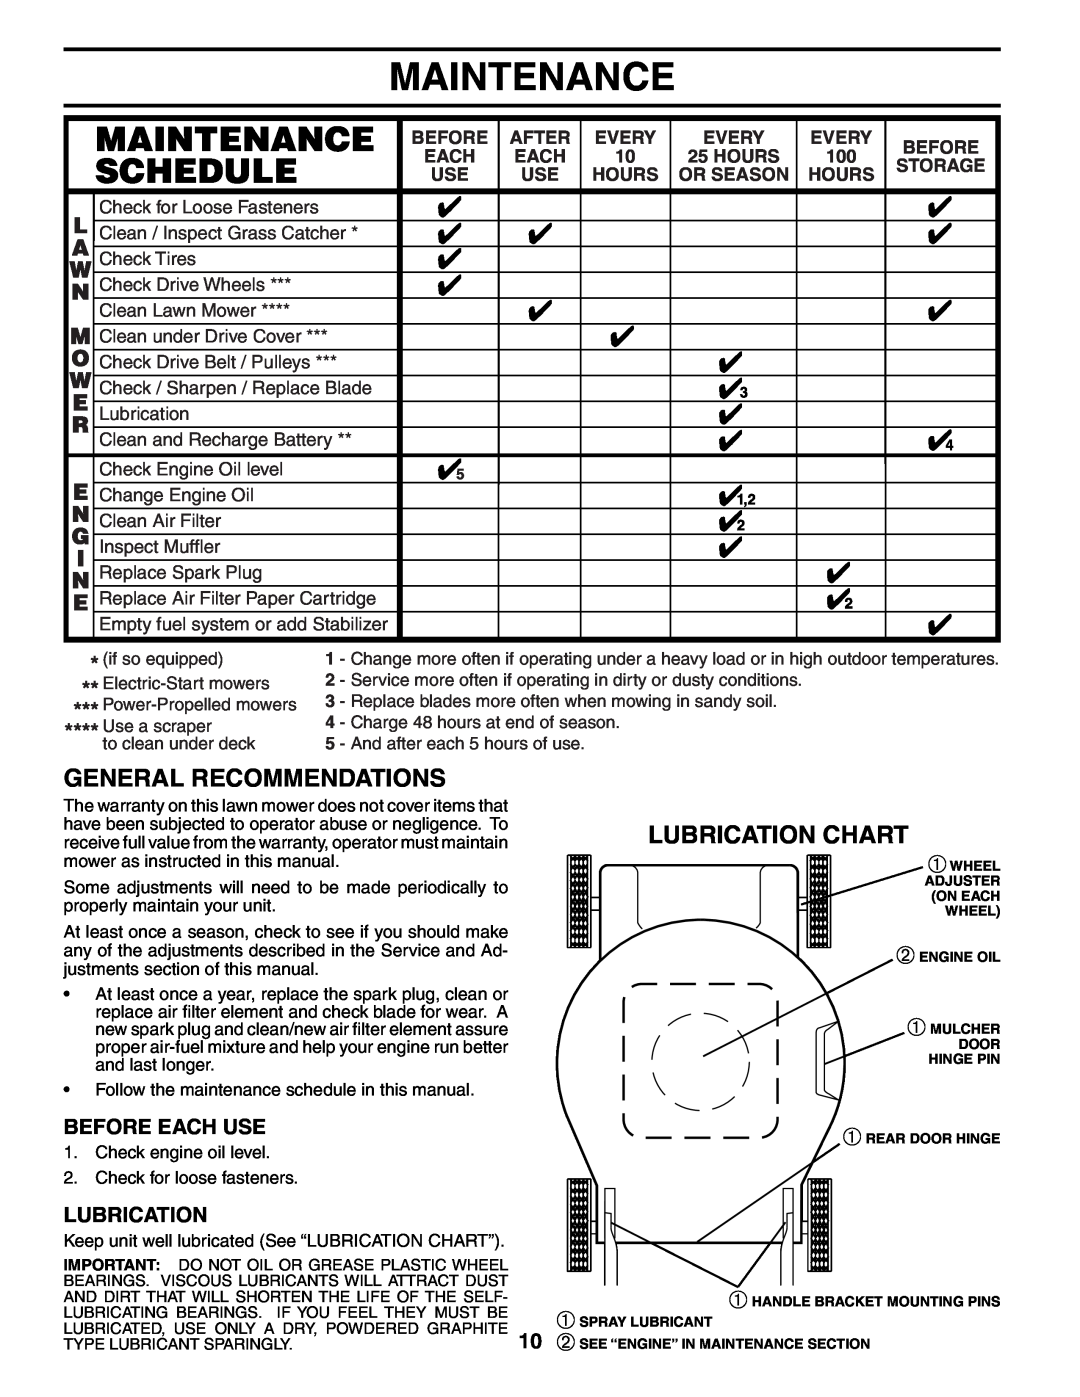 Husqvarna 5521CHV Maintenance, General Recommendations, Lubrication Chart, Before Each Use, After, Every, Storage, Hours 